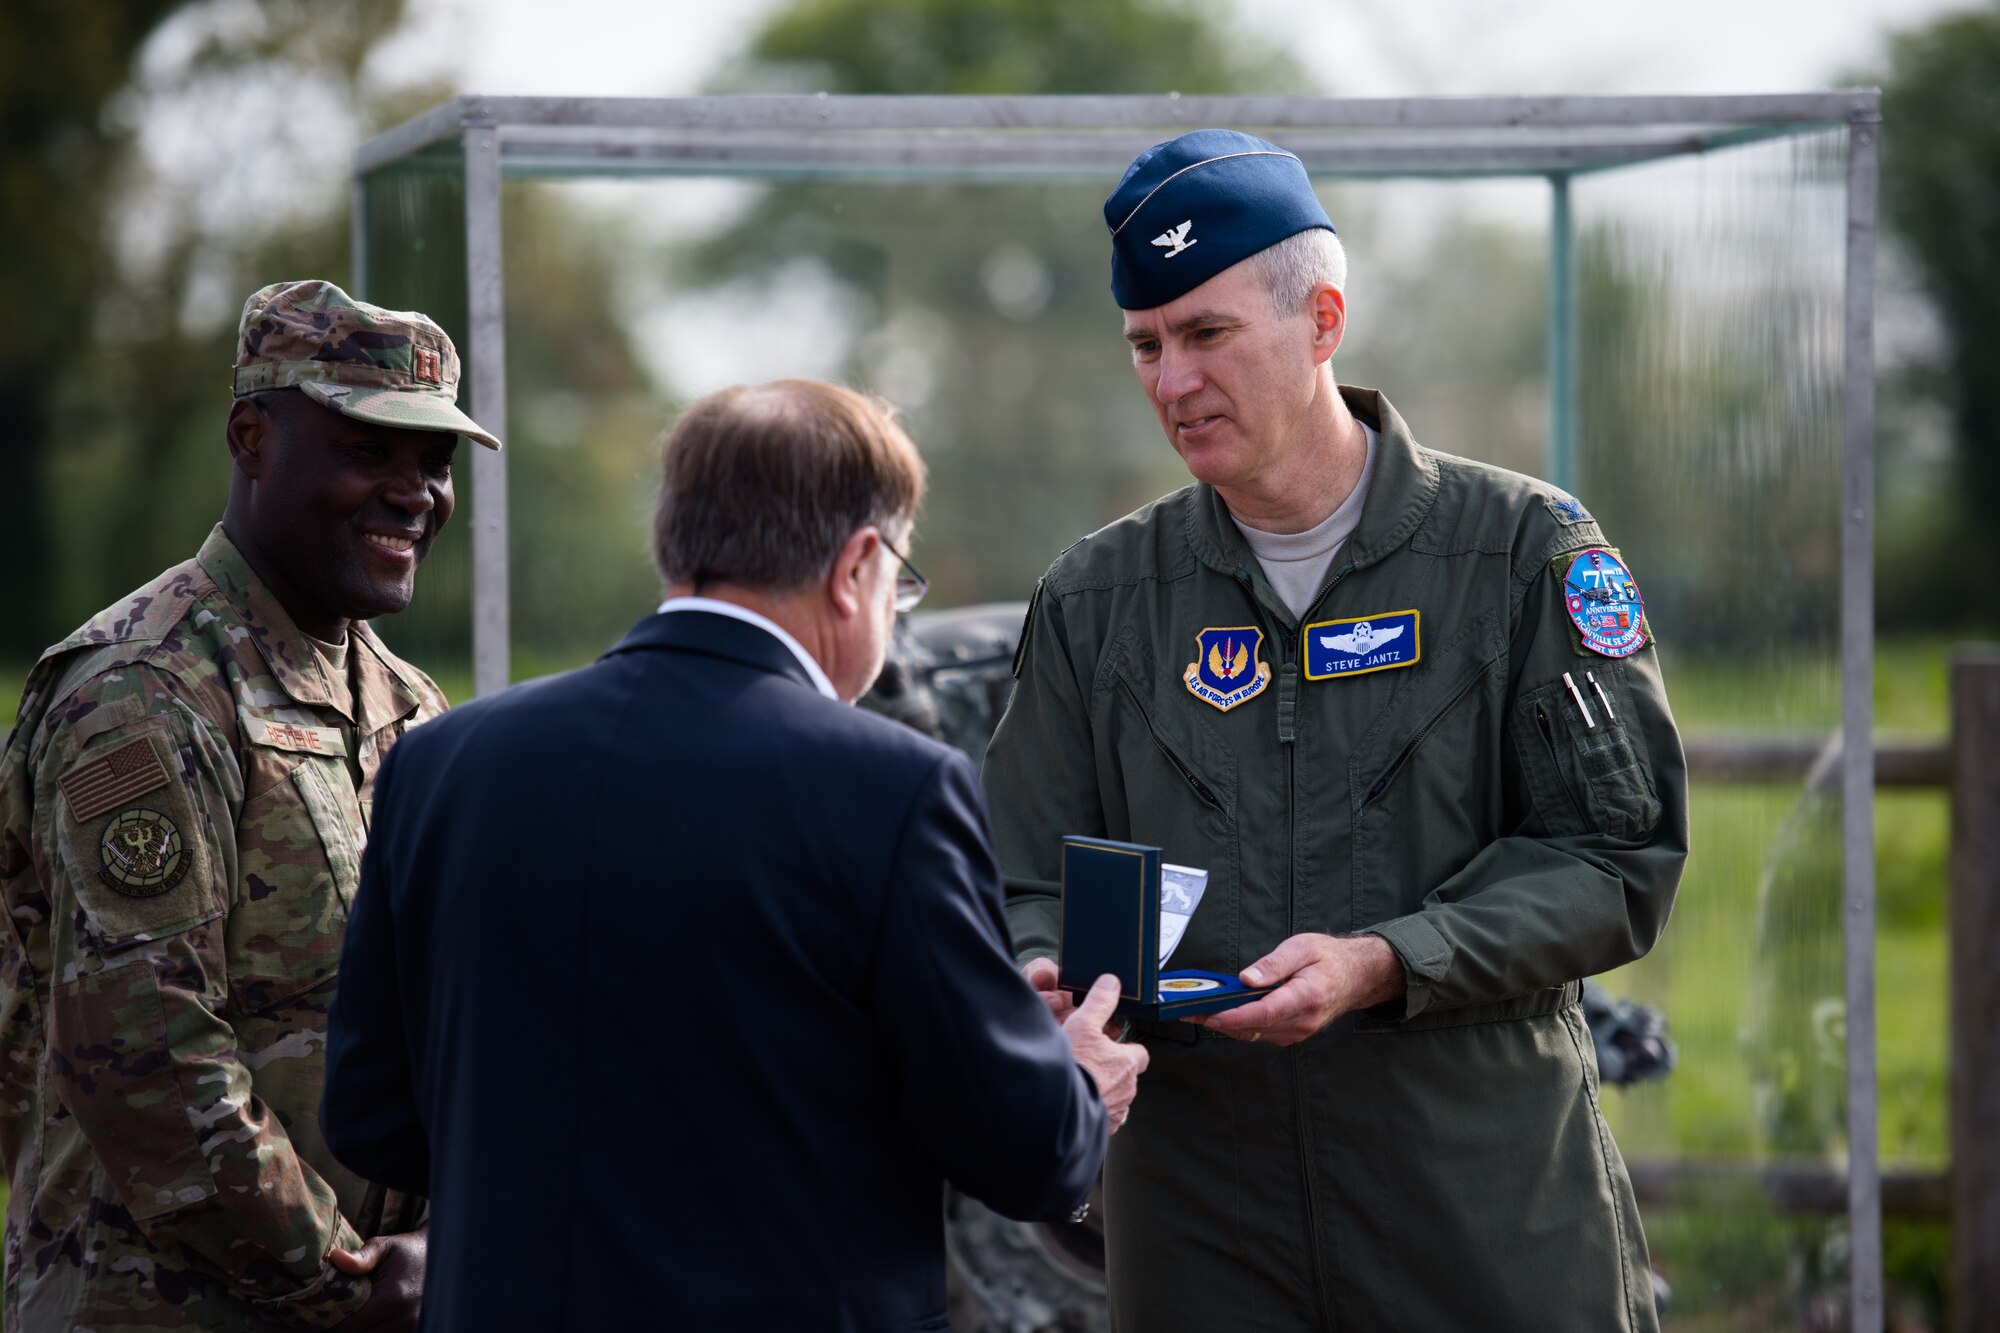 U.S. Air Force Col. Steven J. Jantz, 435th Air Ground Operations Wing and 435th Air Expeditionary Wing vice commander, accepts a medallion from Philippe Catherine, Mayor of Picauville, France, on behalf of the 435th AGOW at a WWII memorial in Picauville, May 1, 2019. Catherine presented the medallion as a way to say thank you to Jantz’ team for refurbishing the memorial. (U.S. Air Force photo by Staff Sgt. Devin Boyer)